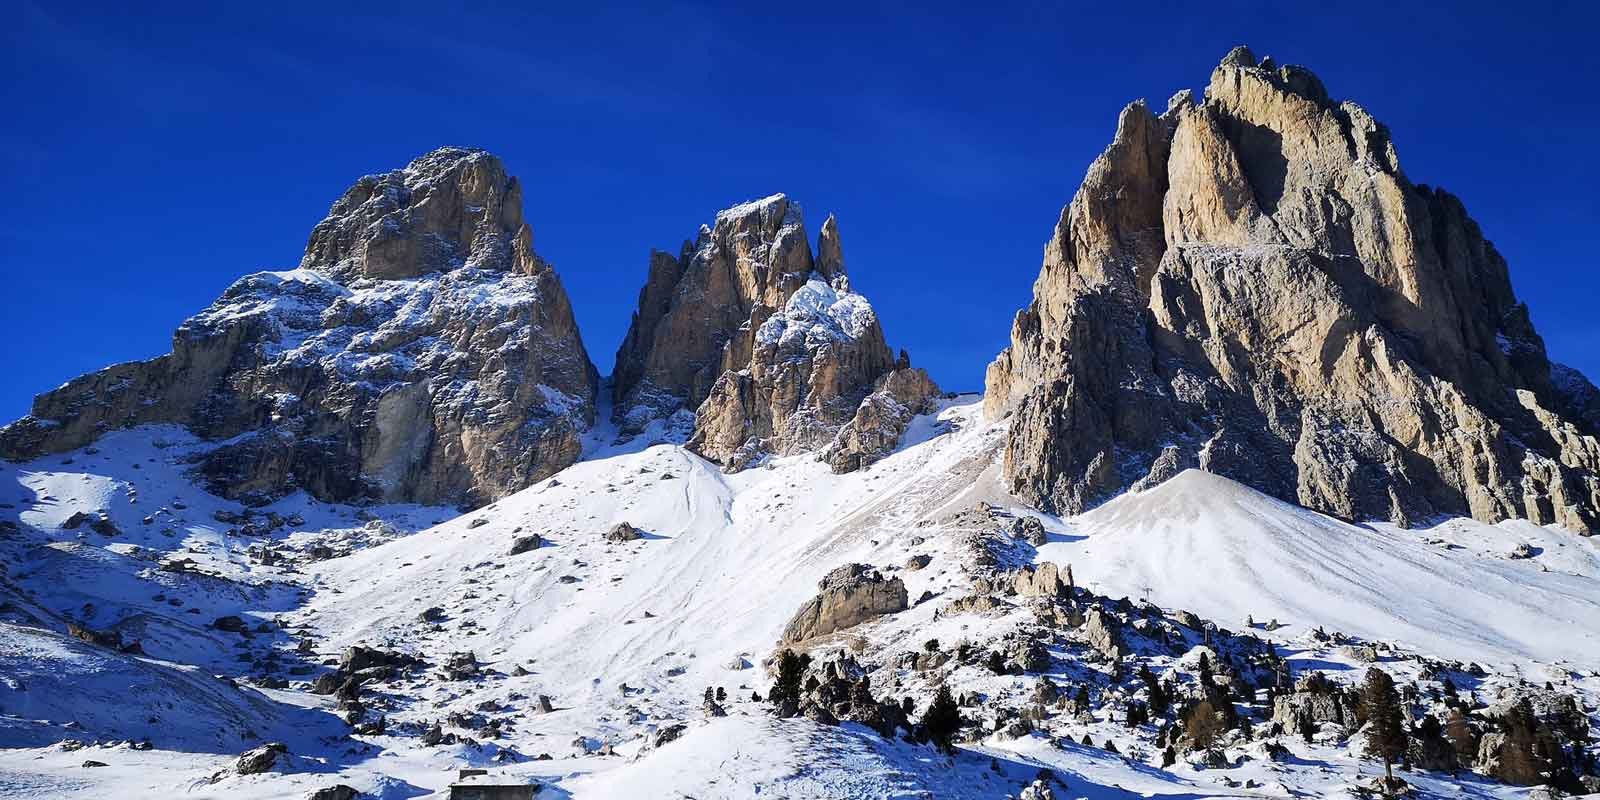 A dreaming holiday in Val Gardena